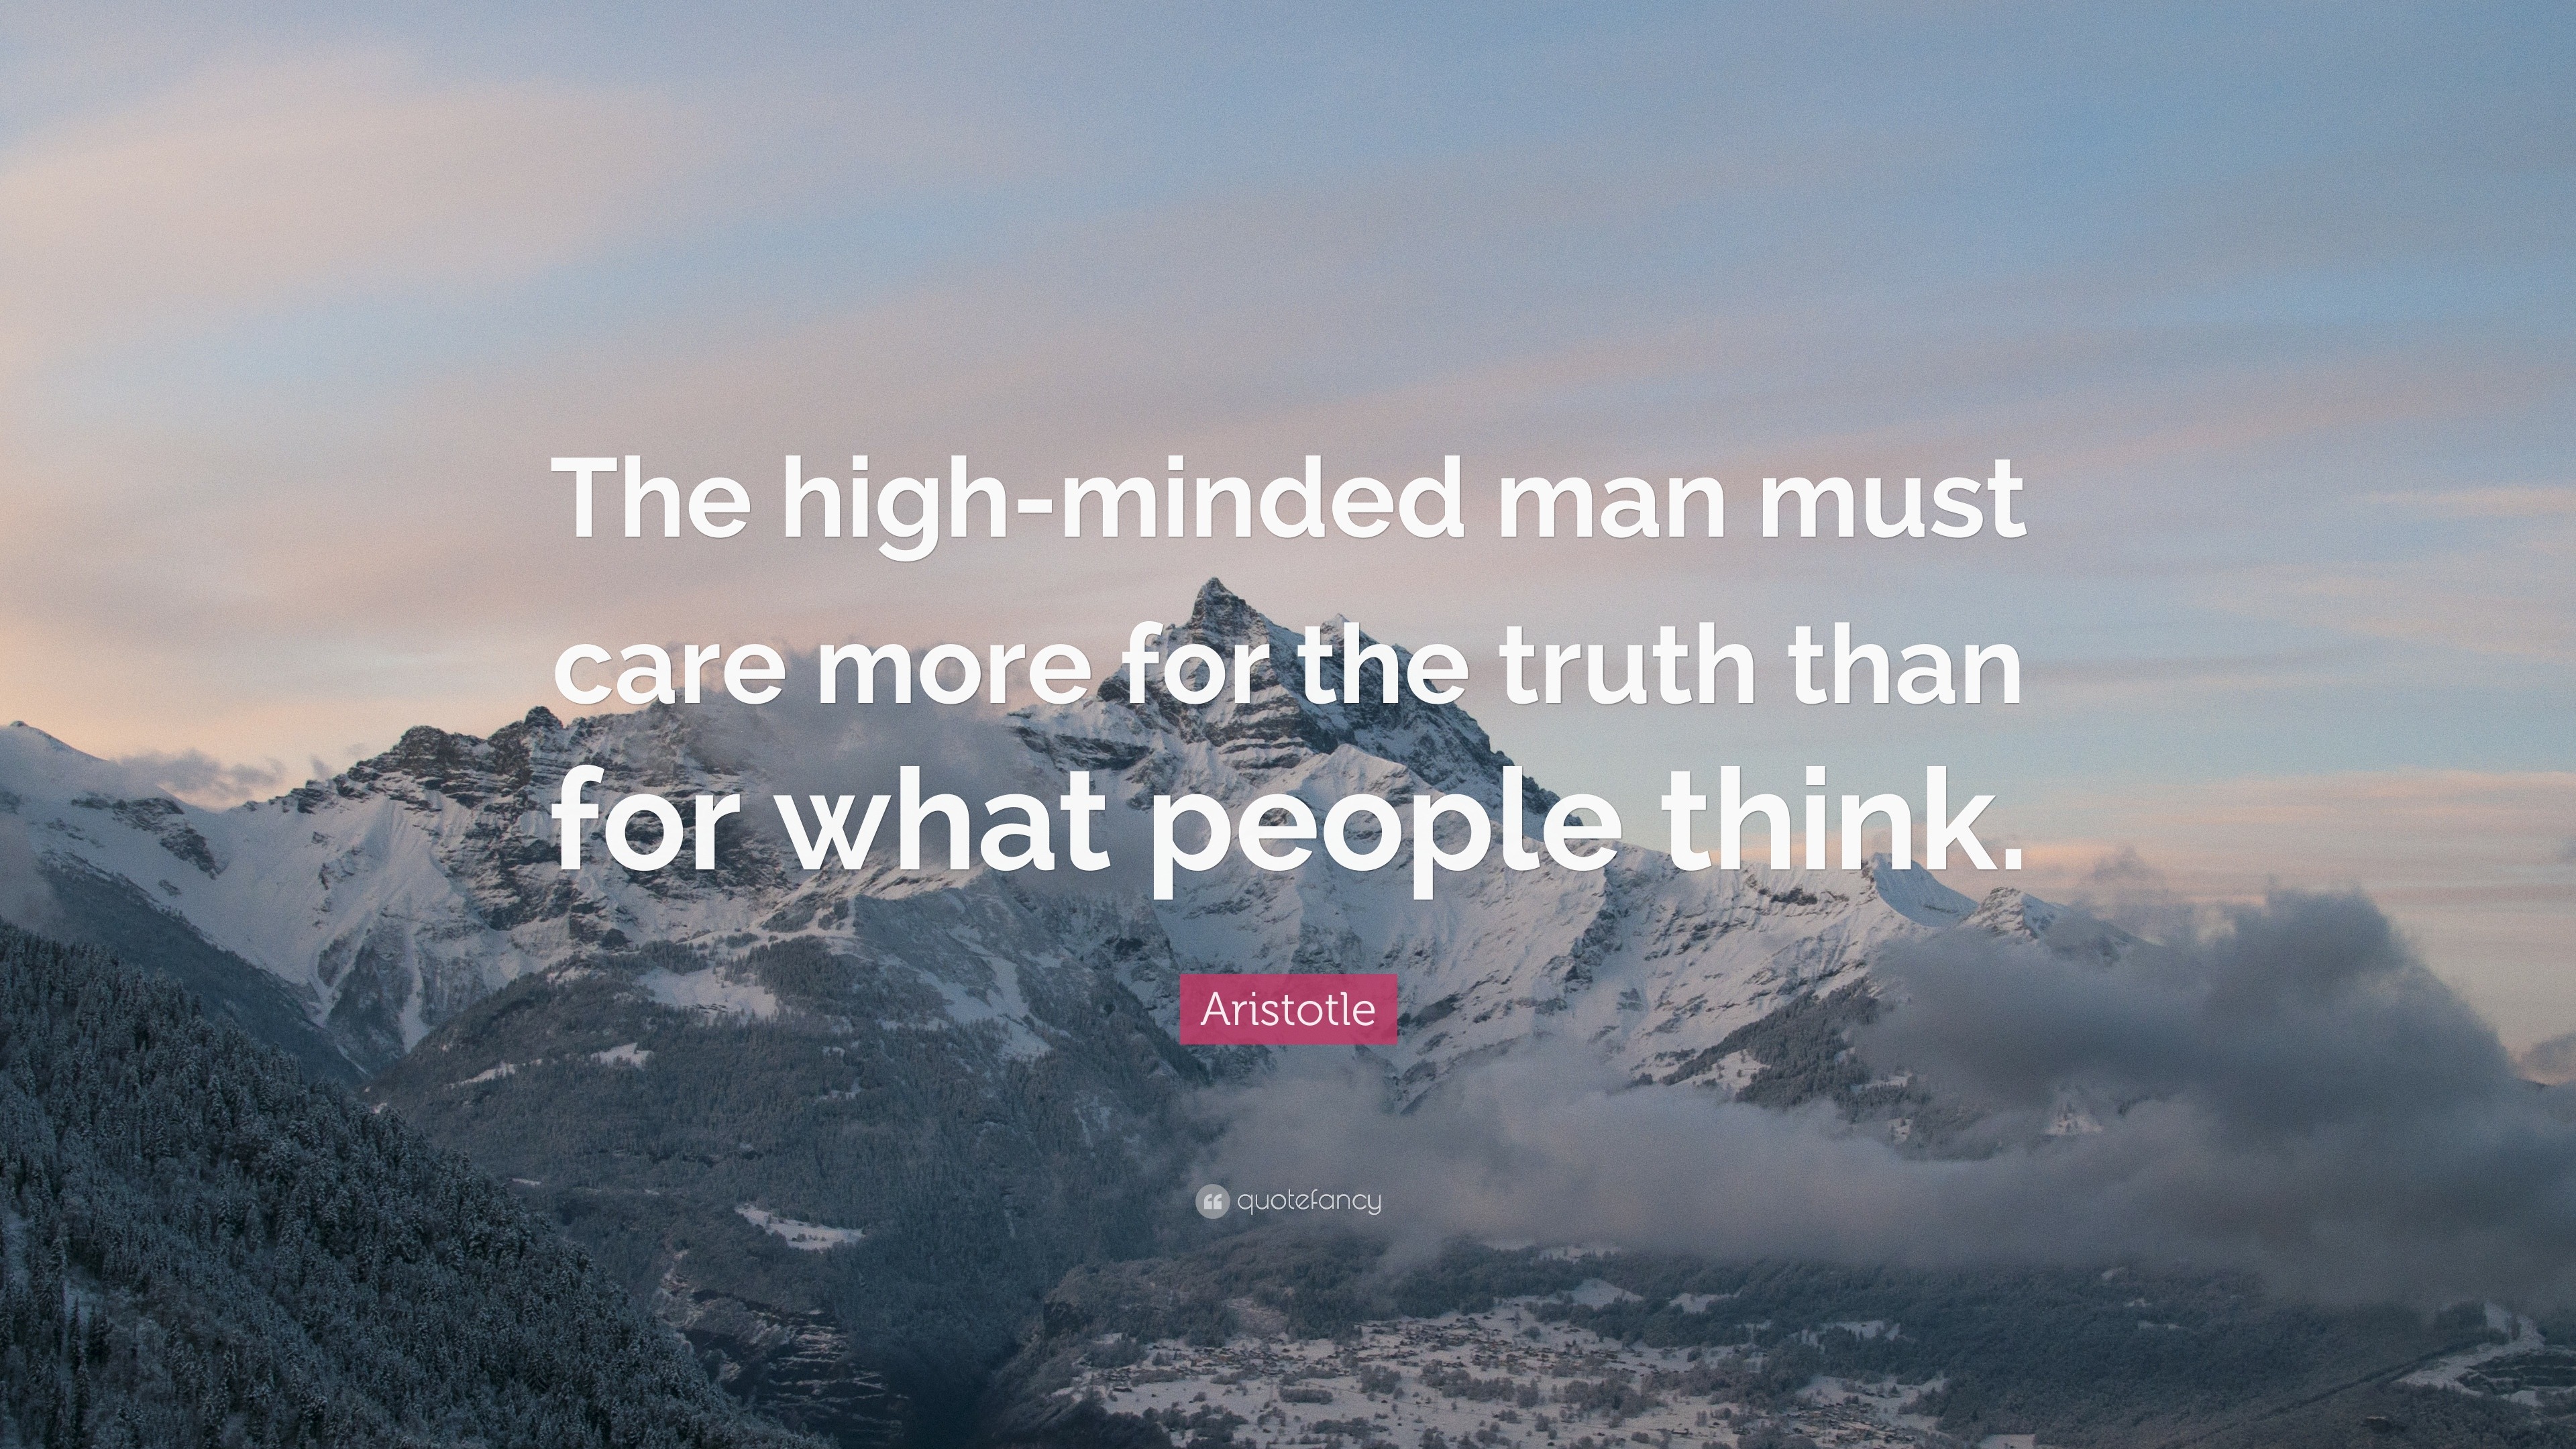 Aristotle Quote: "The high-minded man must care more for ...